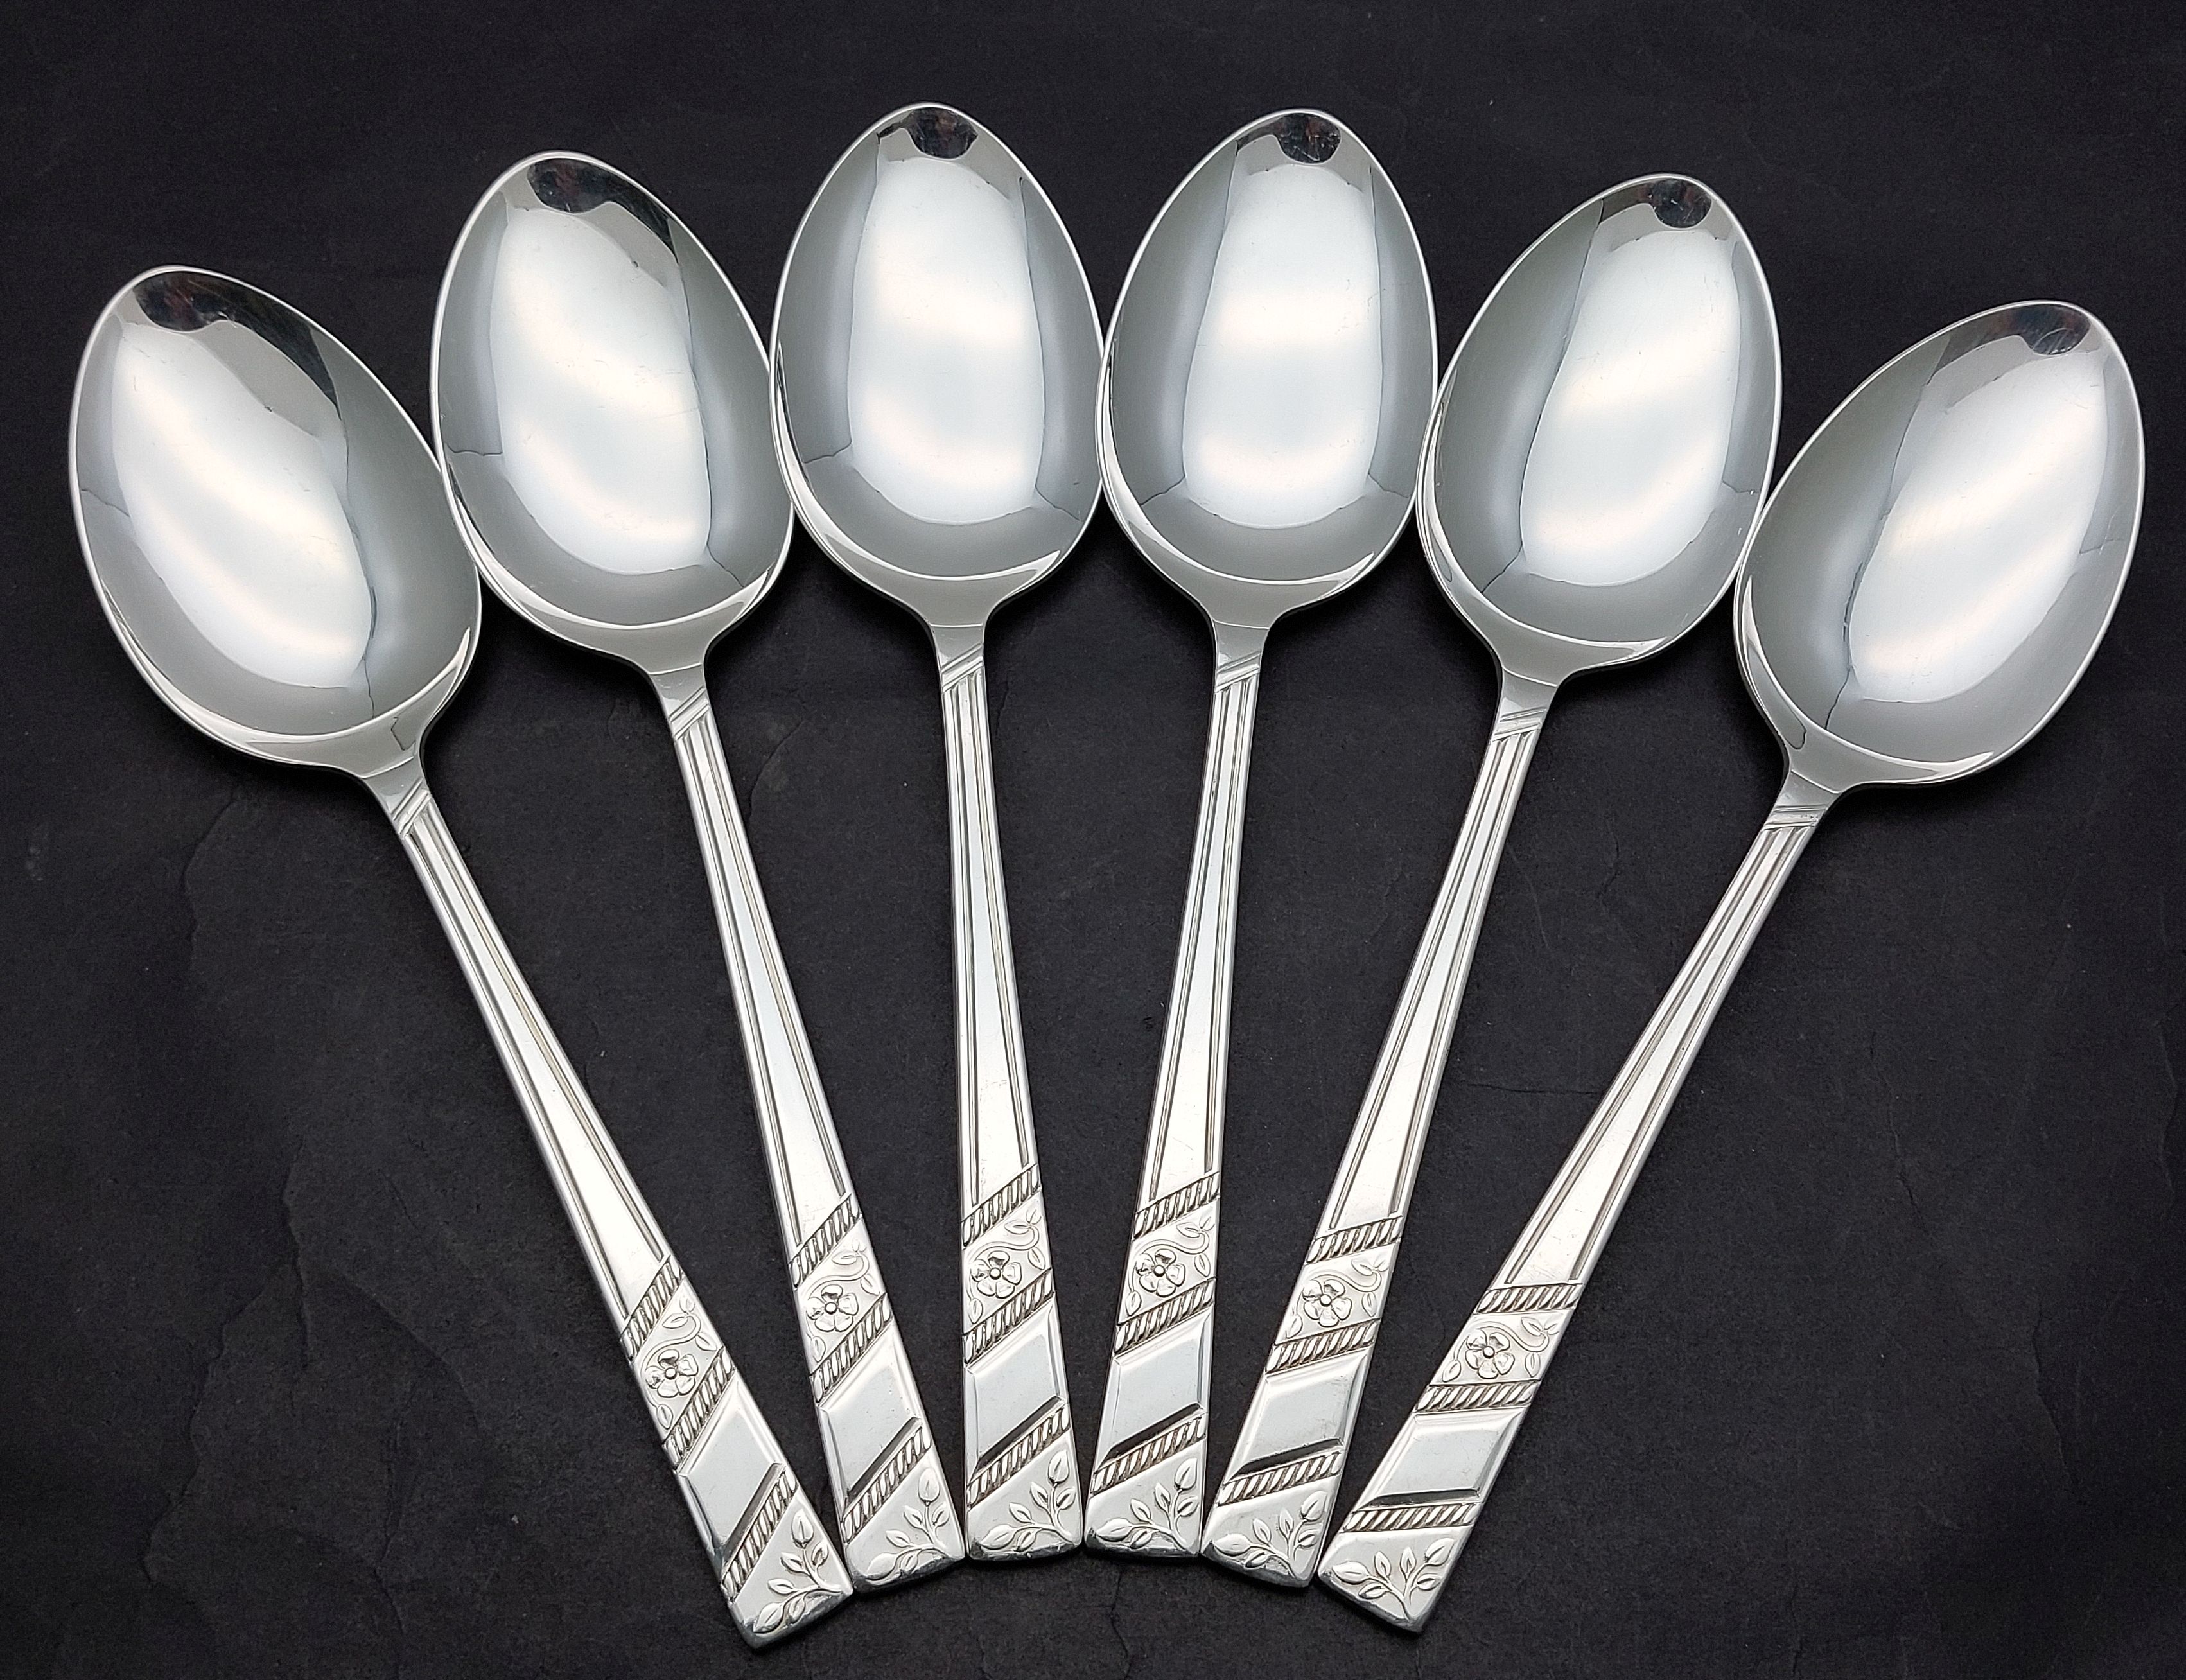 VINERS SILVER ROSE SET OF 6 DESSERT SPOONS - VINTAGE CUTLERY - PLATED |  Vintage-Kitsch Antique Silver, Cutlery & collectables